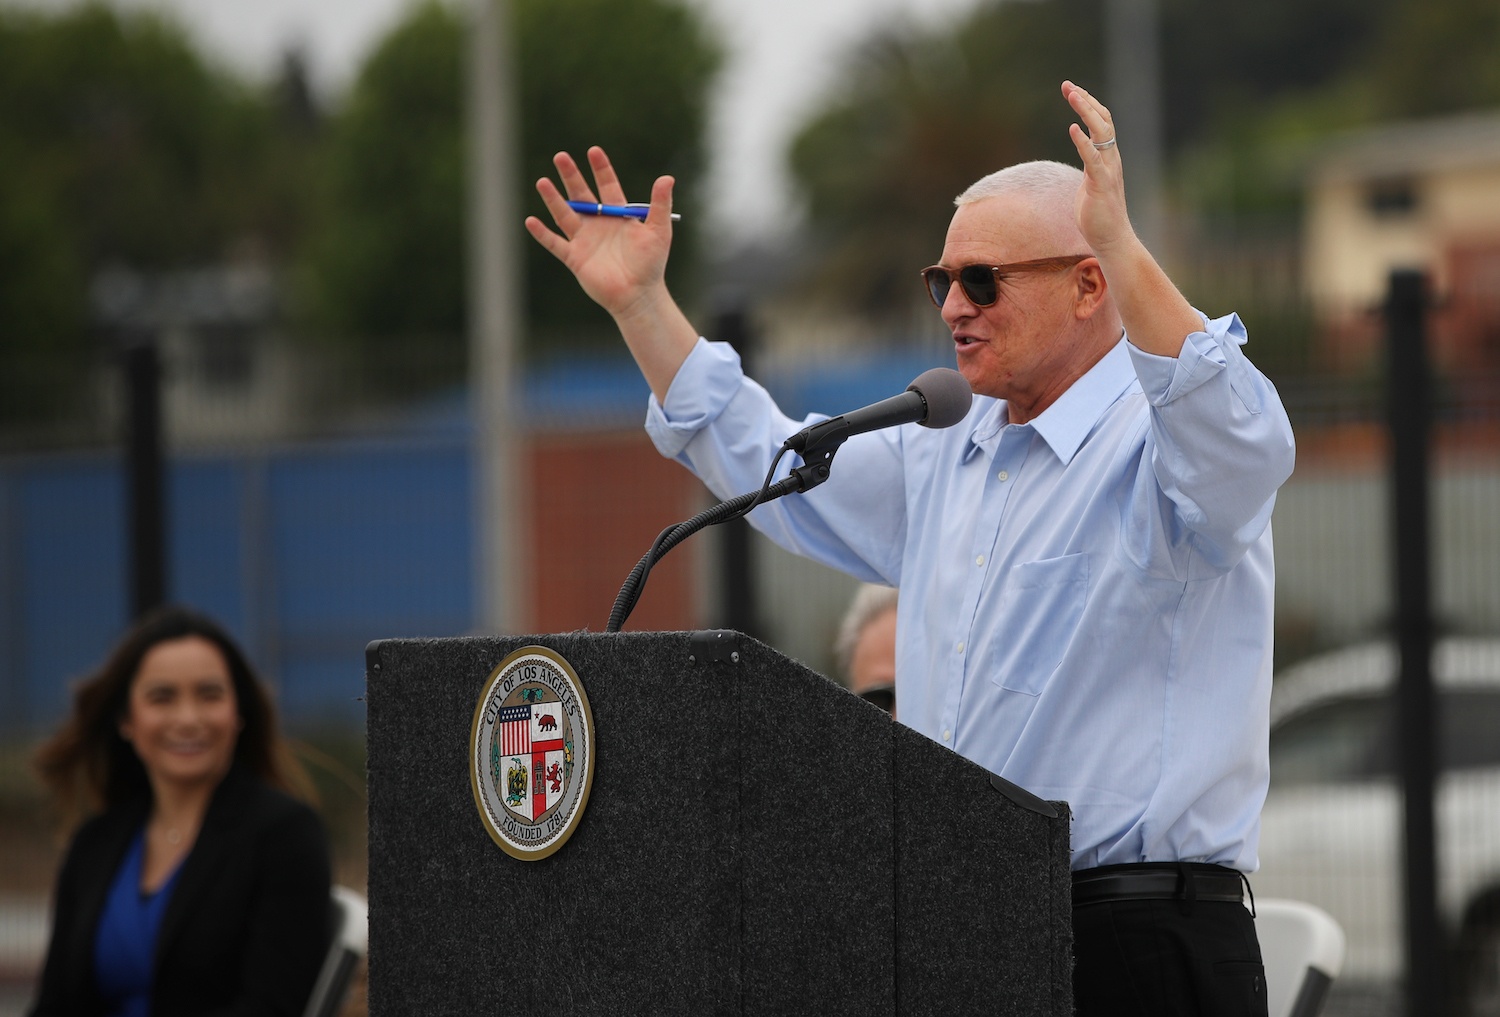 Los Angeles City Councilman Mike Bonin speaks during the opening ceremony for Argo Drain Sub-Basin Facility Project on June 17, 2021 in Playa Del Rey, California.